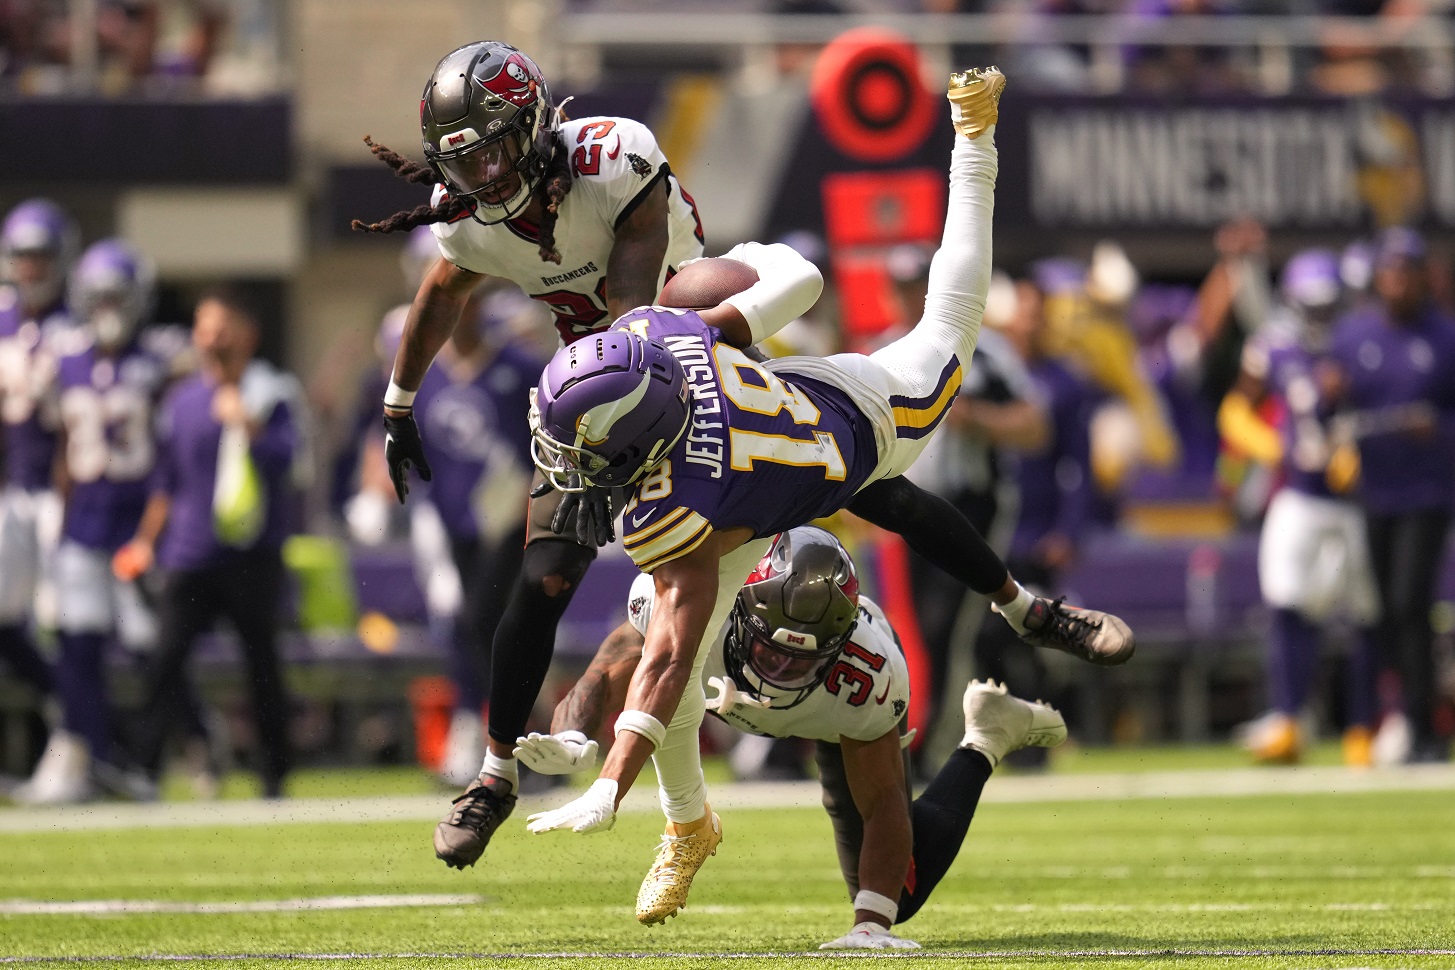 Buccaneers edge Vikings, as Baker Mayfield finishes strong